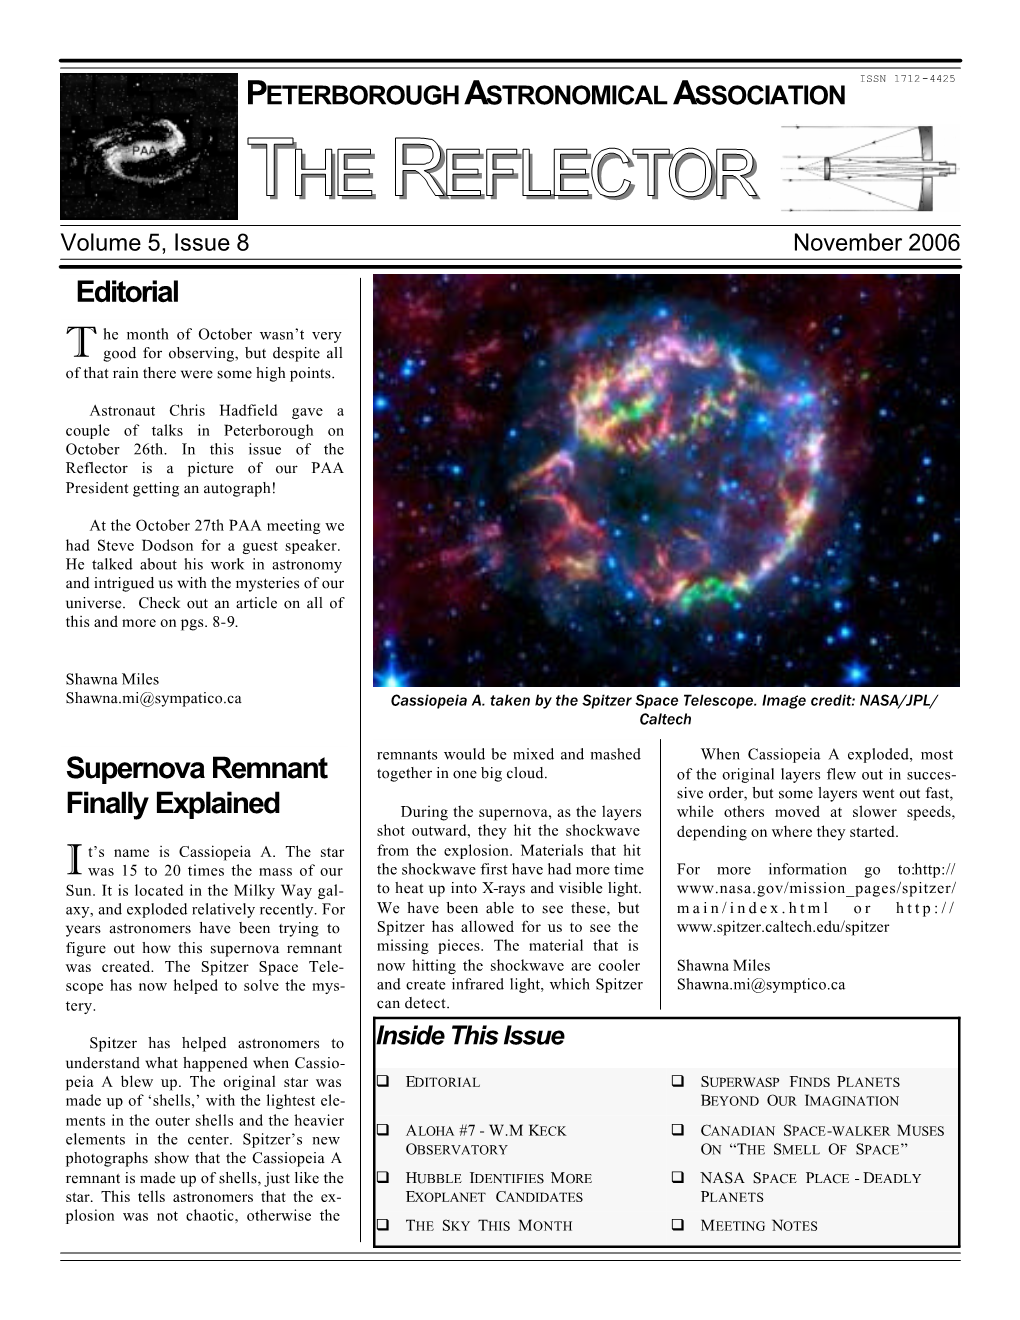 THE REFLECTOR Volume 5, Issue 8 November 2006 Editorial